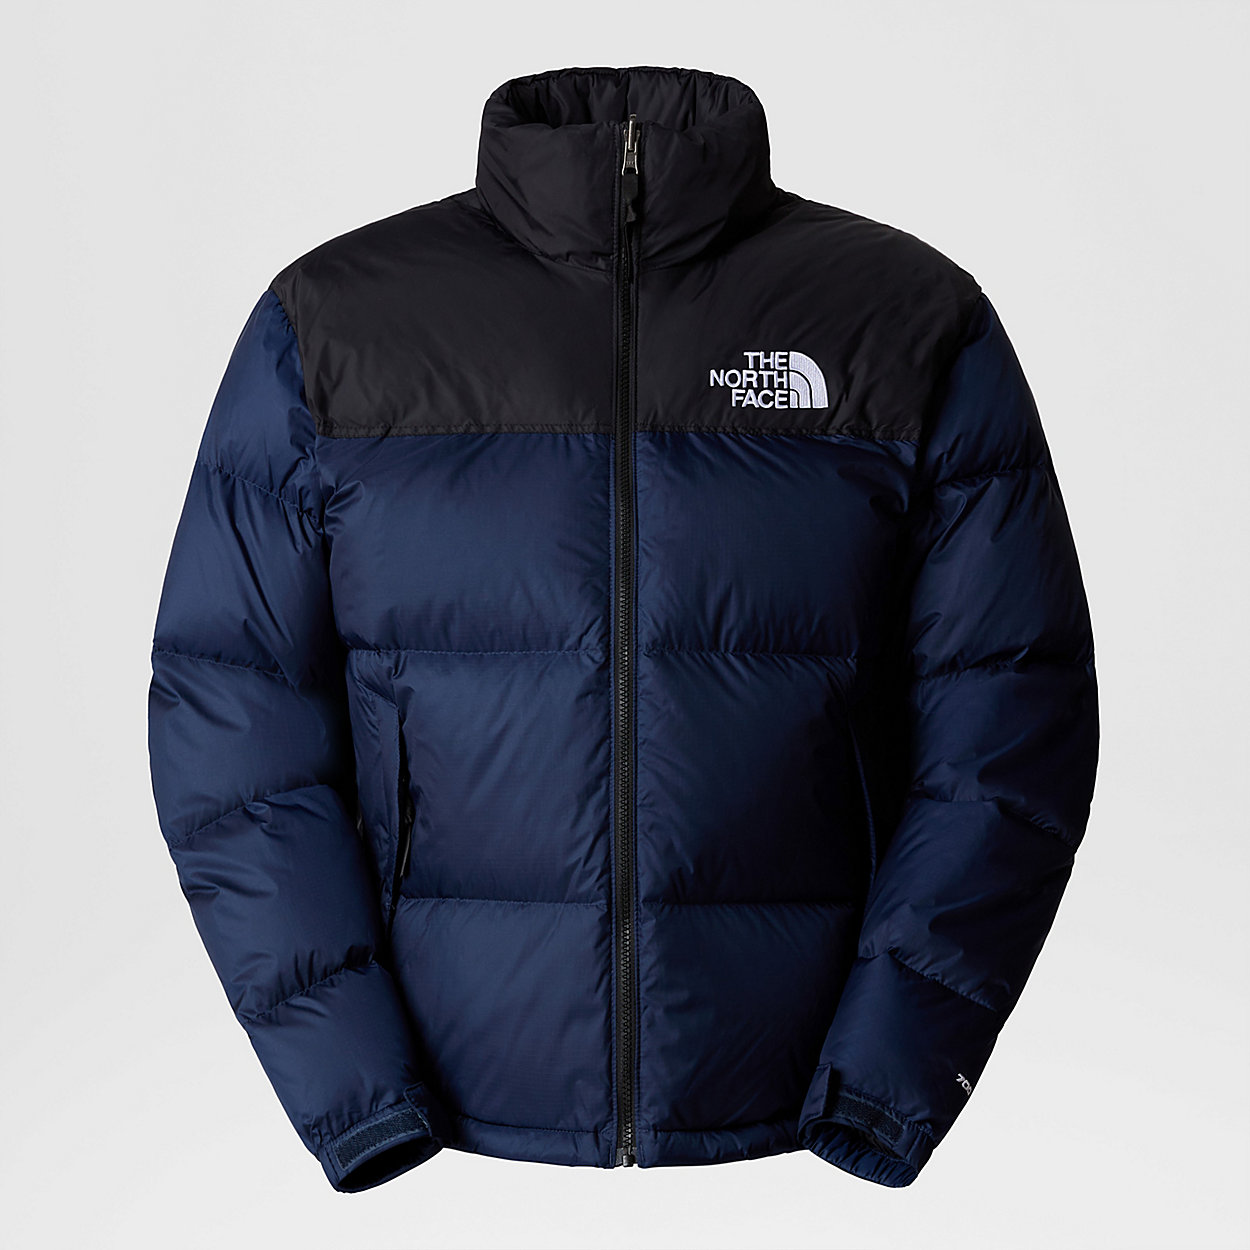 Unlock Wilderness' choice in the Mountain Equipment Vs North Face comparison, the 1996 Retro Nuptse Jacket by The North Face